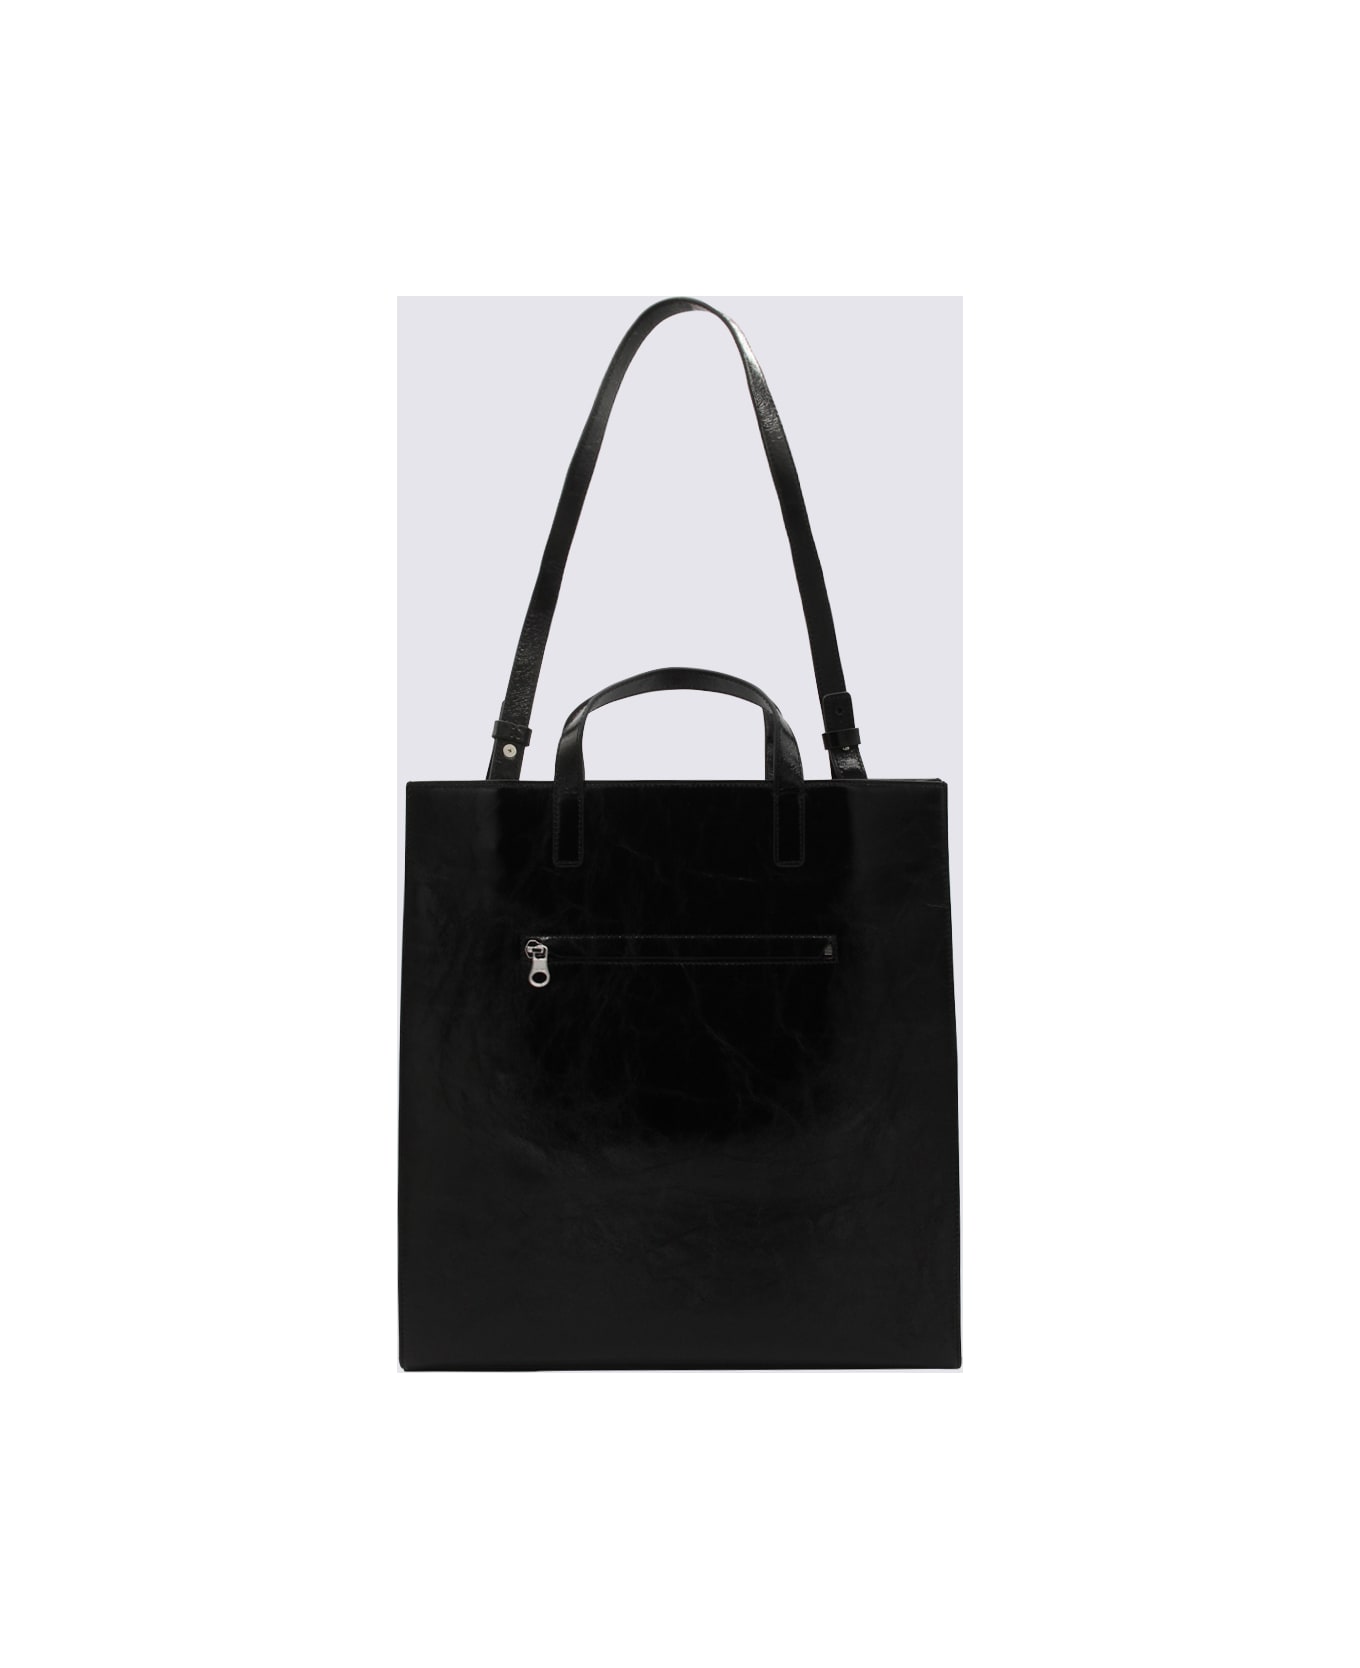 Courrèges Black And White Leather Handle Bag - Black トートバッグ